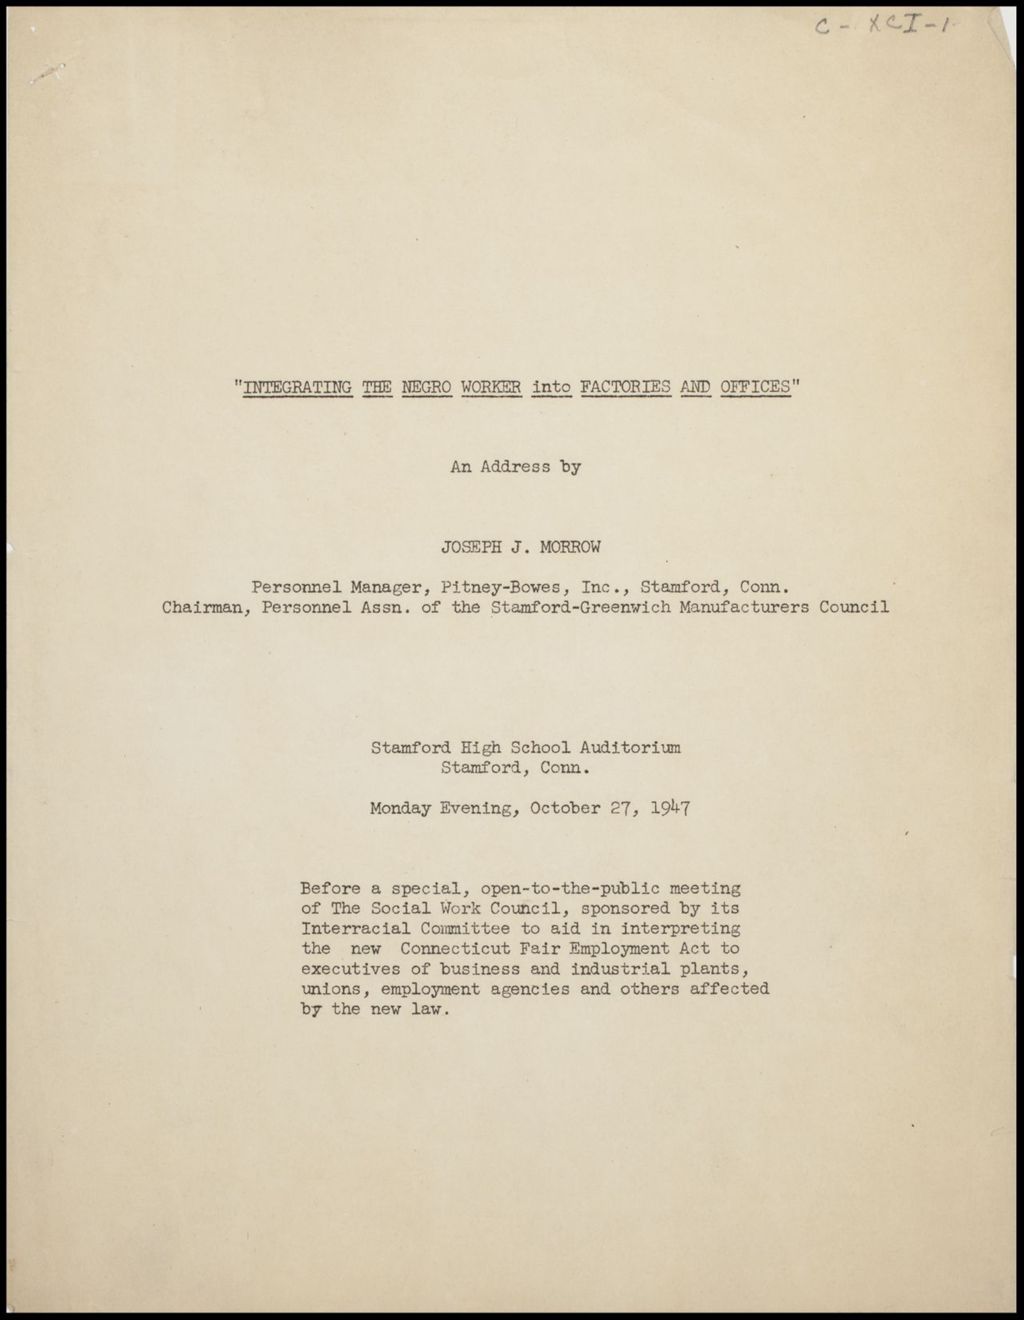 Miniature of National Administrative and Clerical Council Reports, 1948-1955 (Folder III-2447)